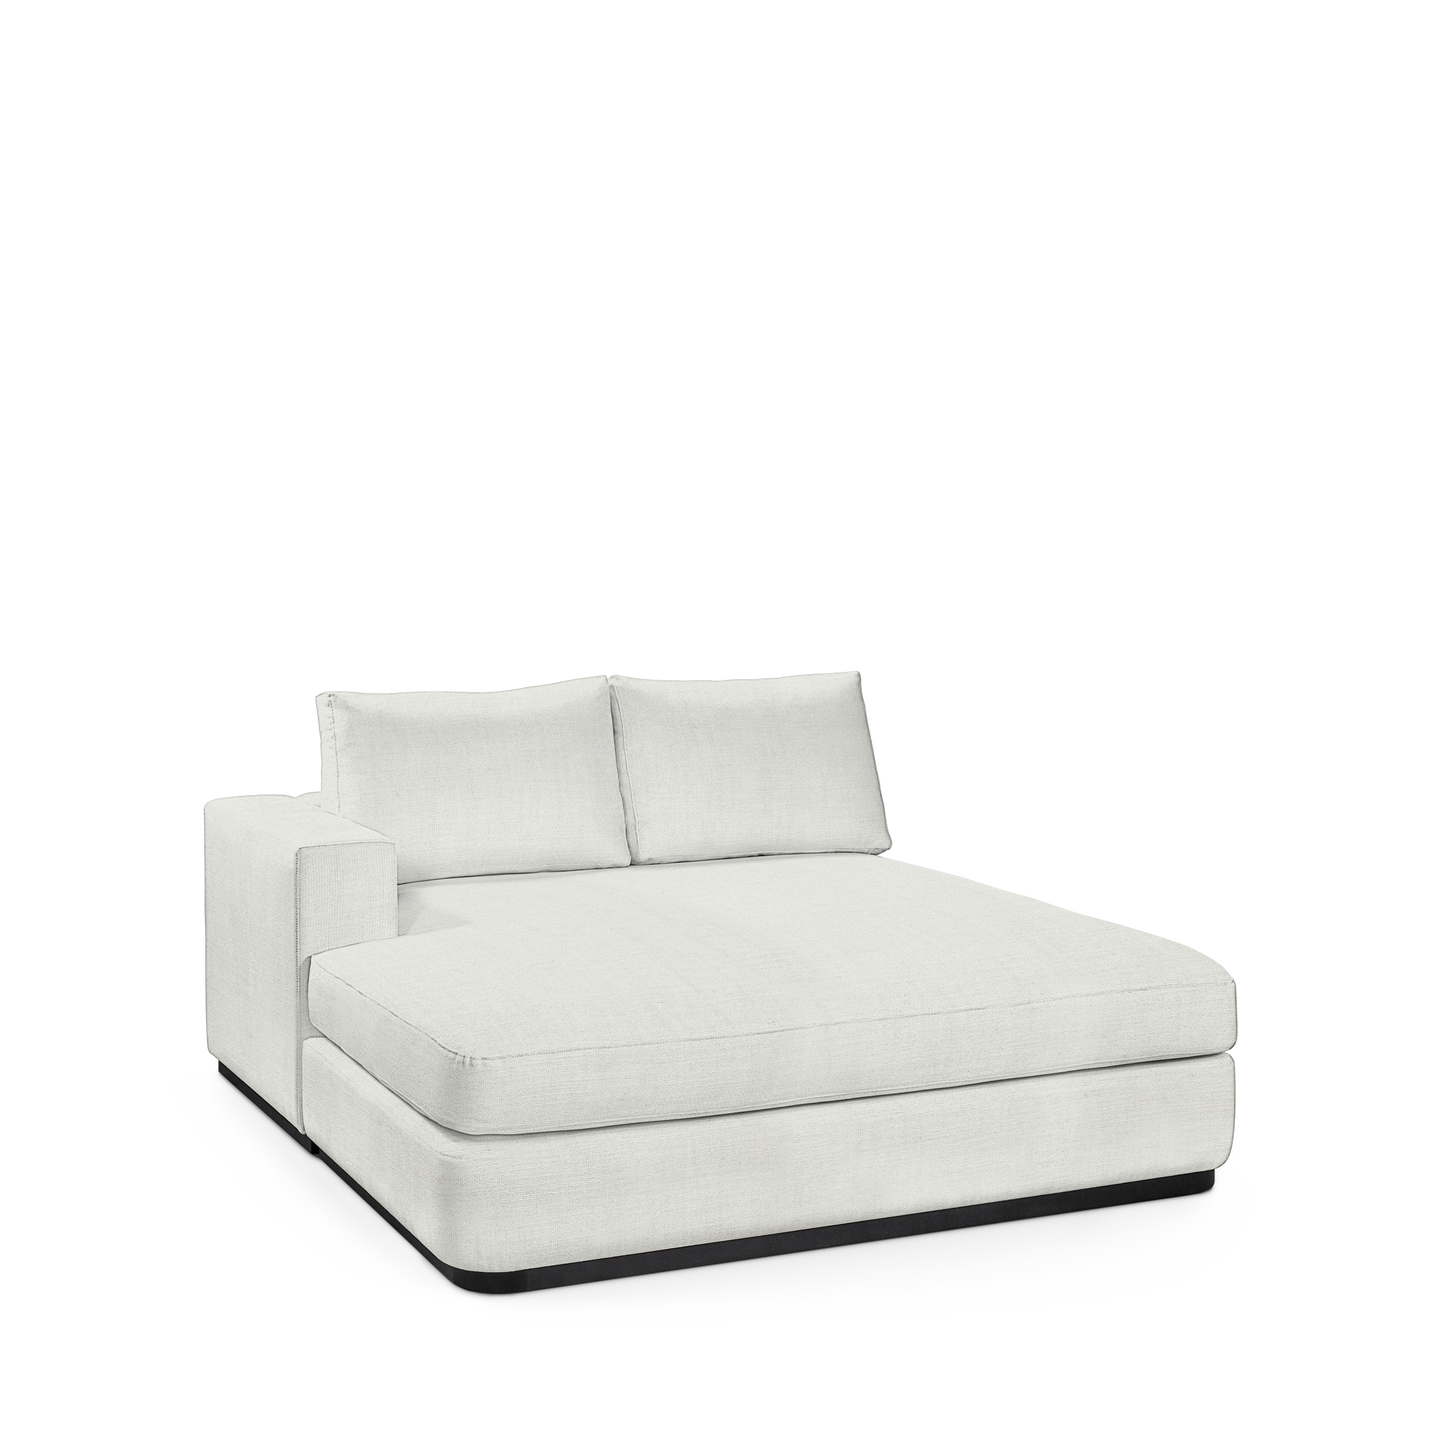 ATLAS 160 Lounge Bed arm rest left with Rocco white textile